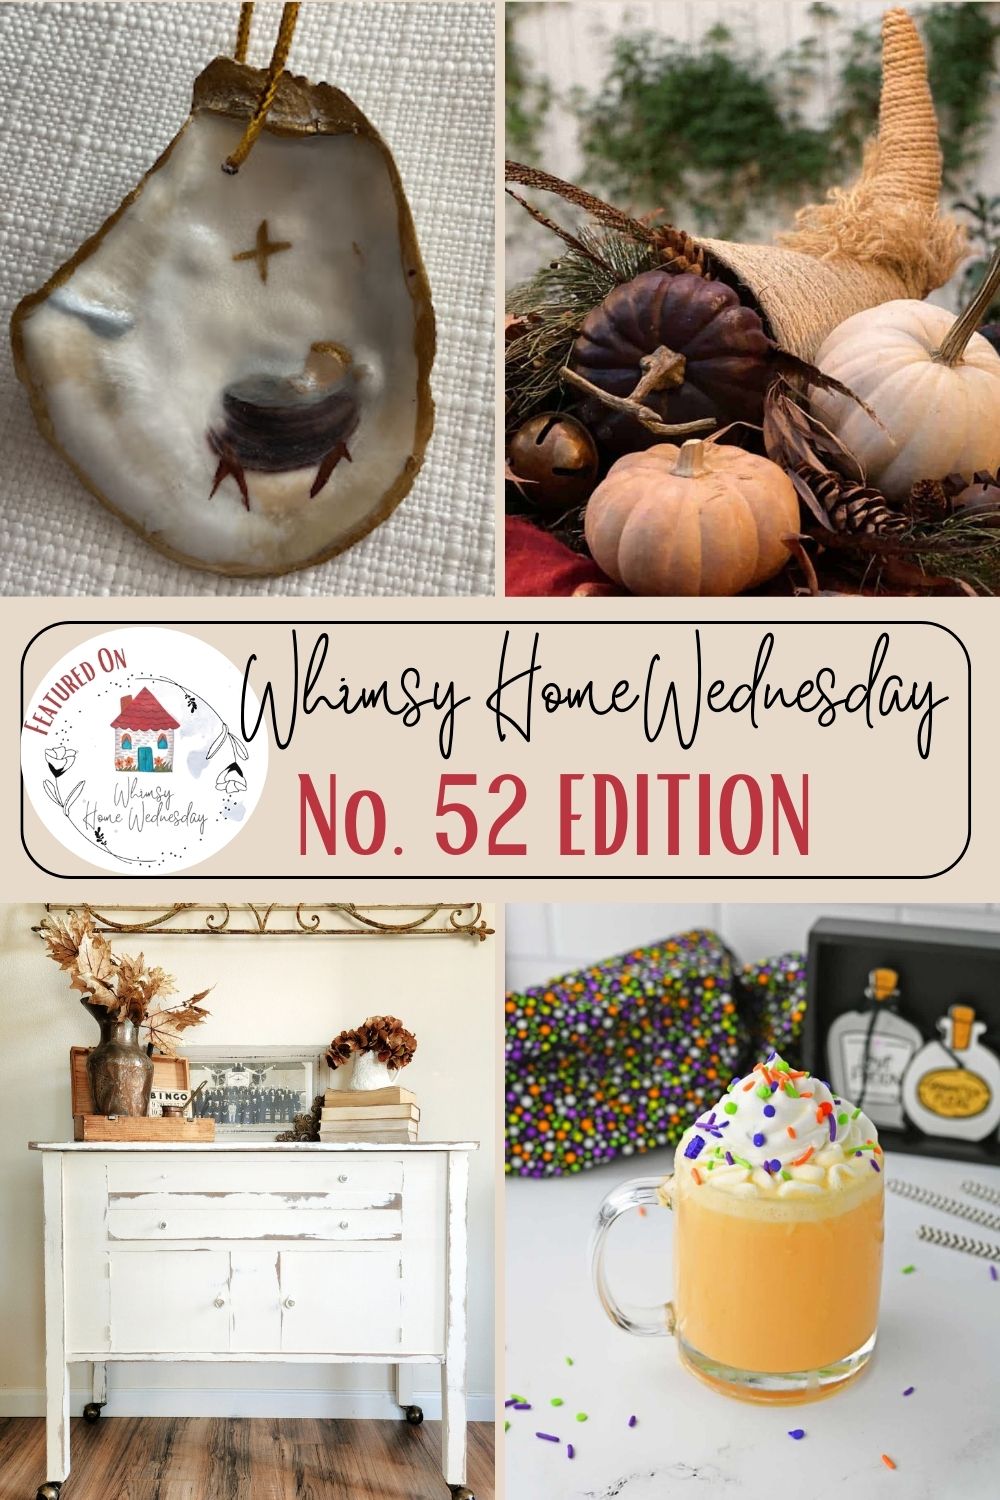 Join us on Whimsy Home Wednesday Blog Link Party No. 53 and see host projects, the features from the previous week and link up your posts!